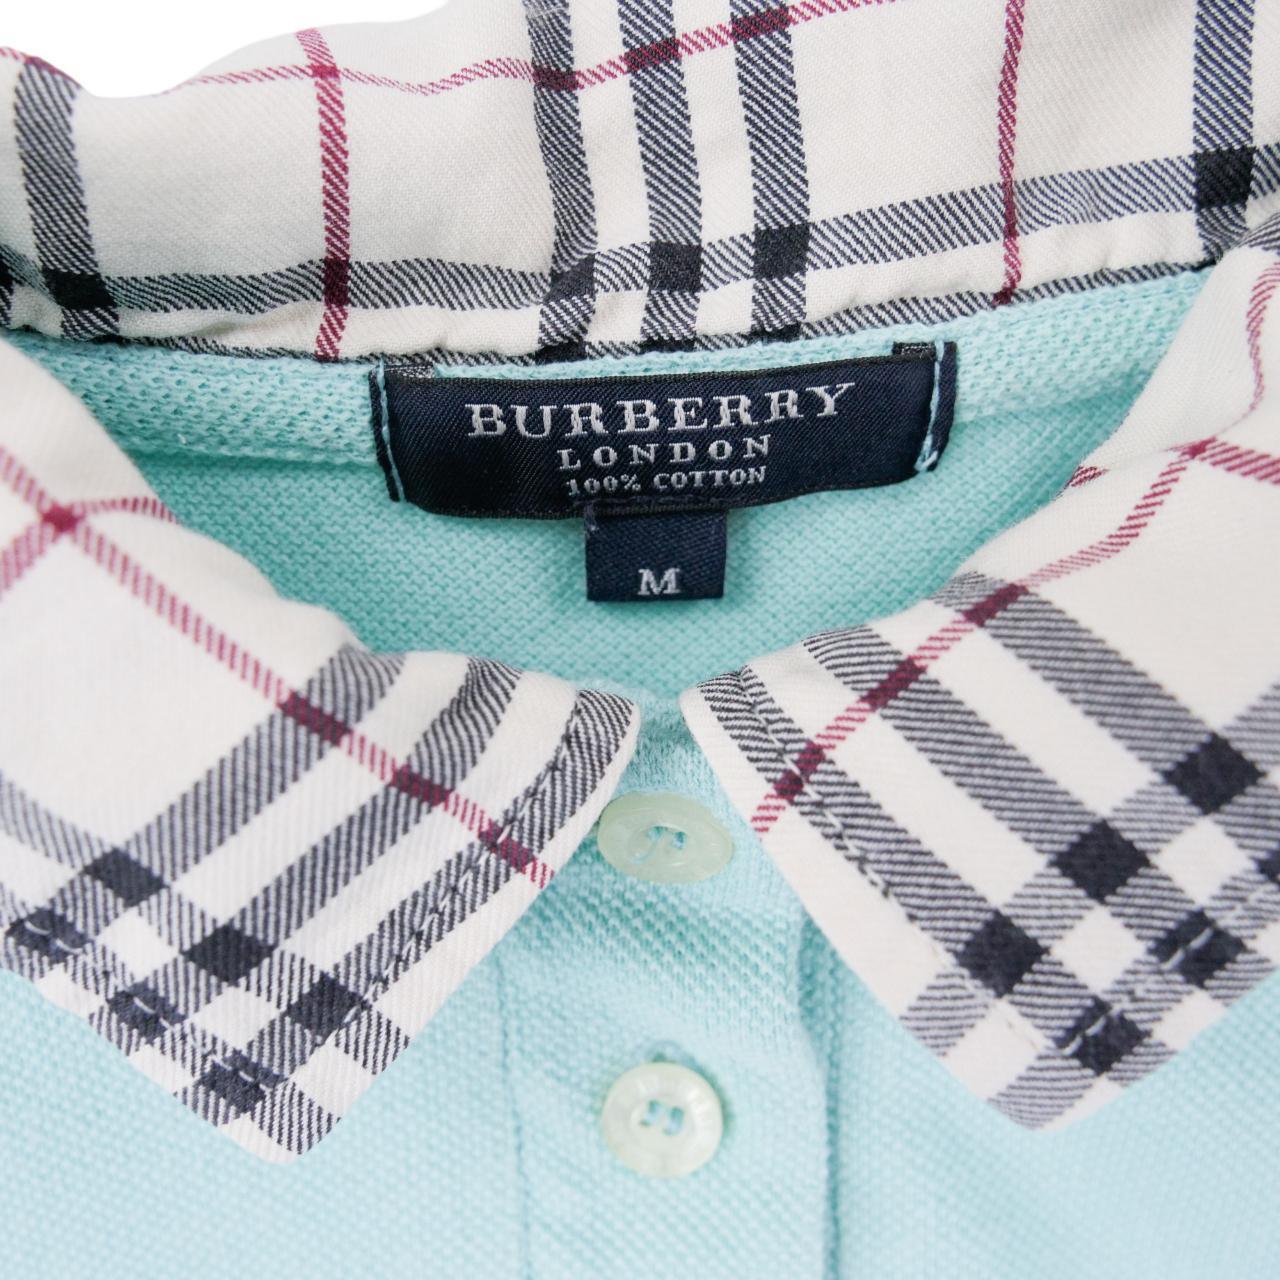 Vintage Burberry Polo Shirt Woman’s Size M - Known Source